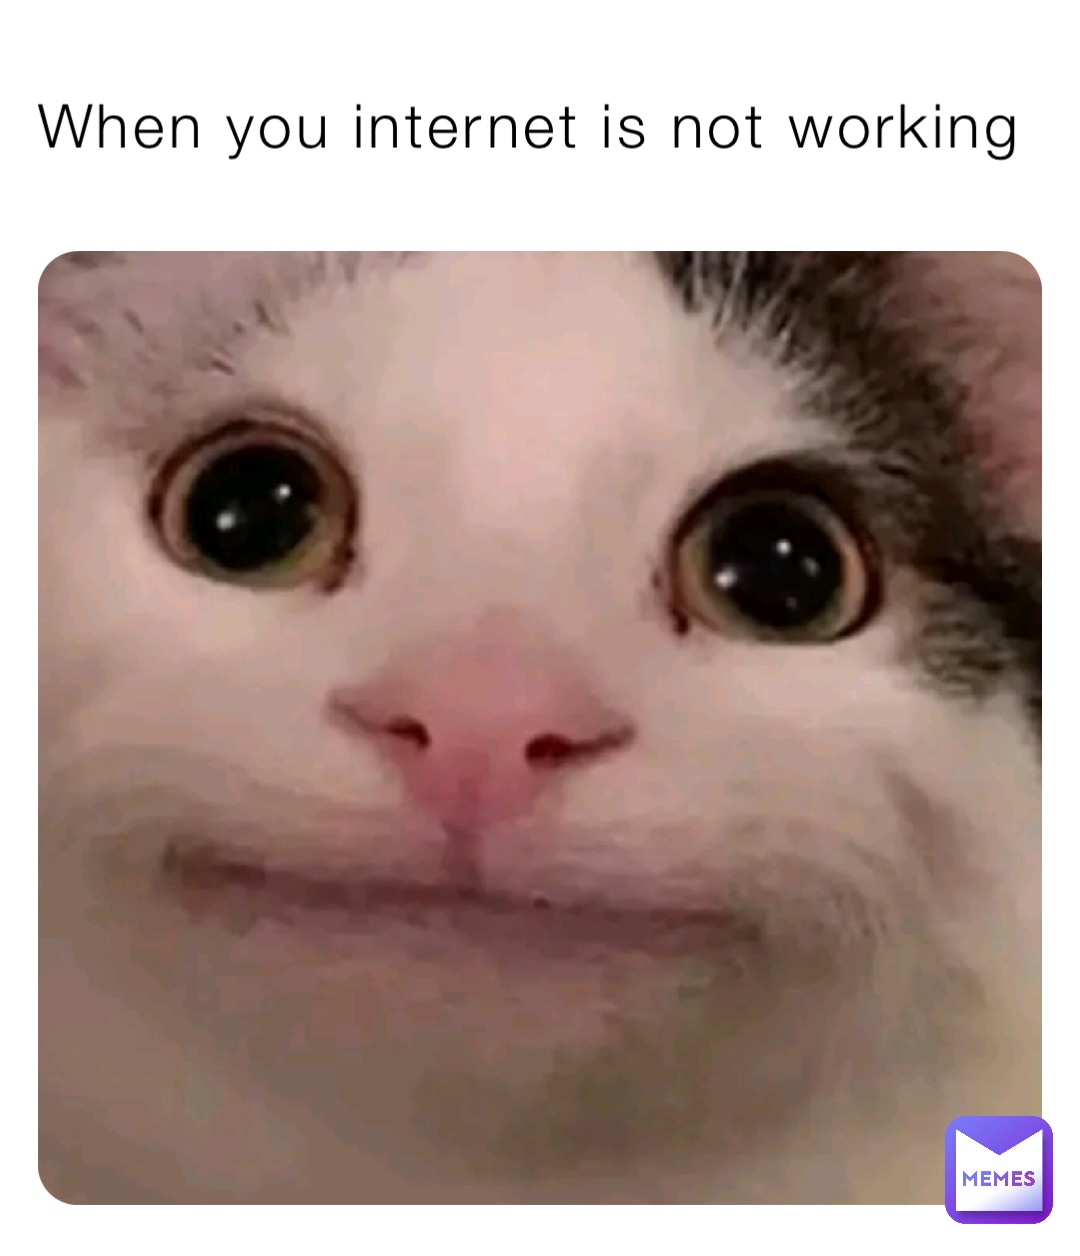 When you internet is not working